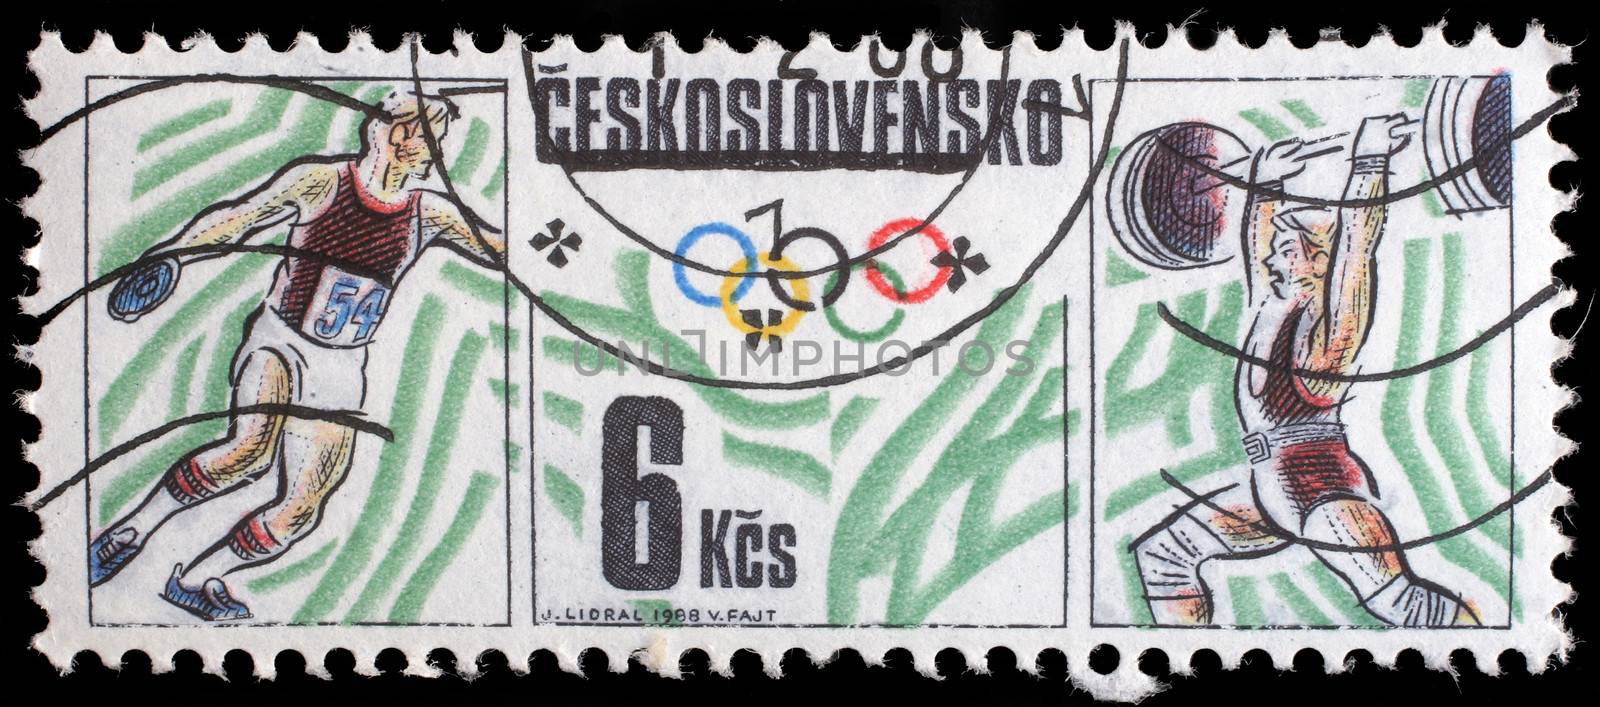 CZECHOSLOVAKIA - CIRCA 1988: stamp printed by Czechoslovakia, shows Olympics, table tennis and weightlifting, circa 1988